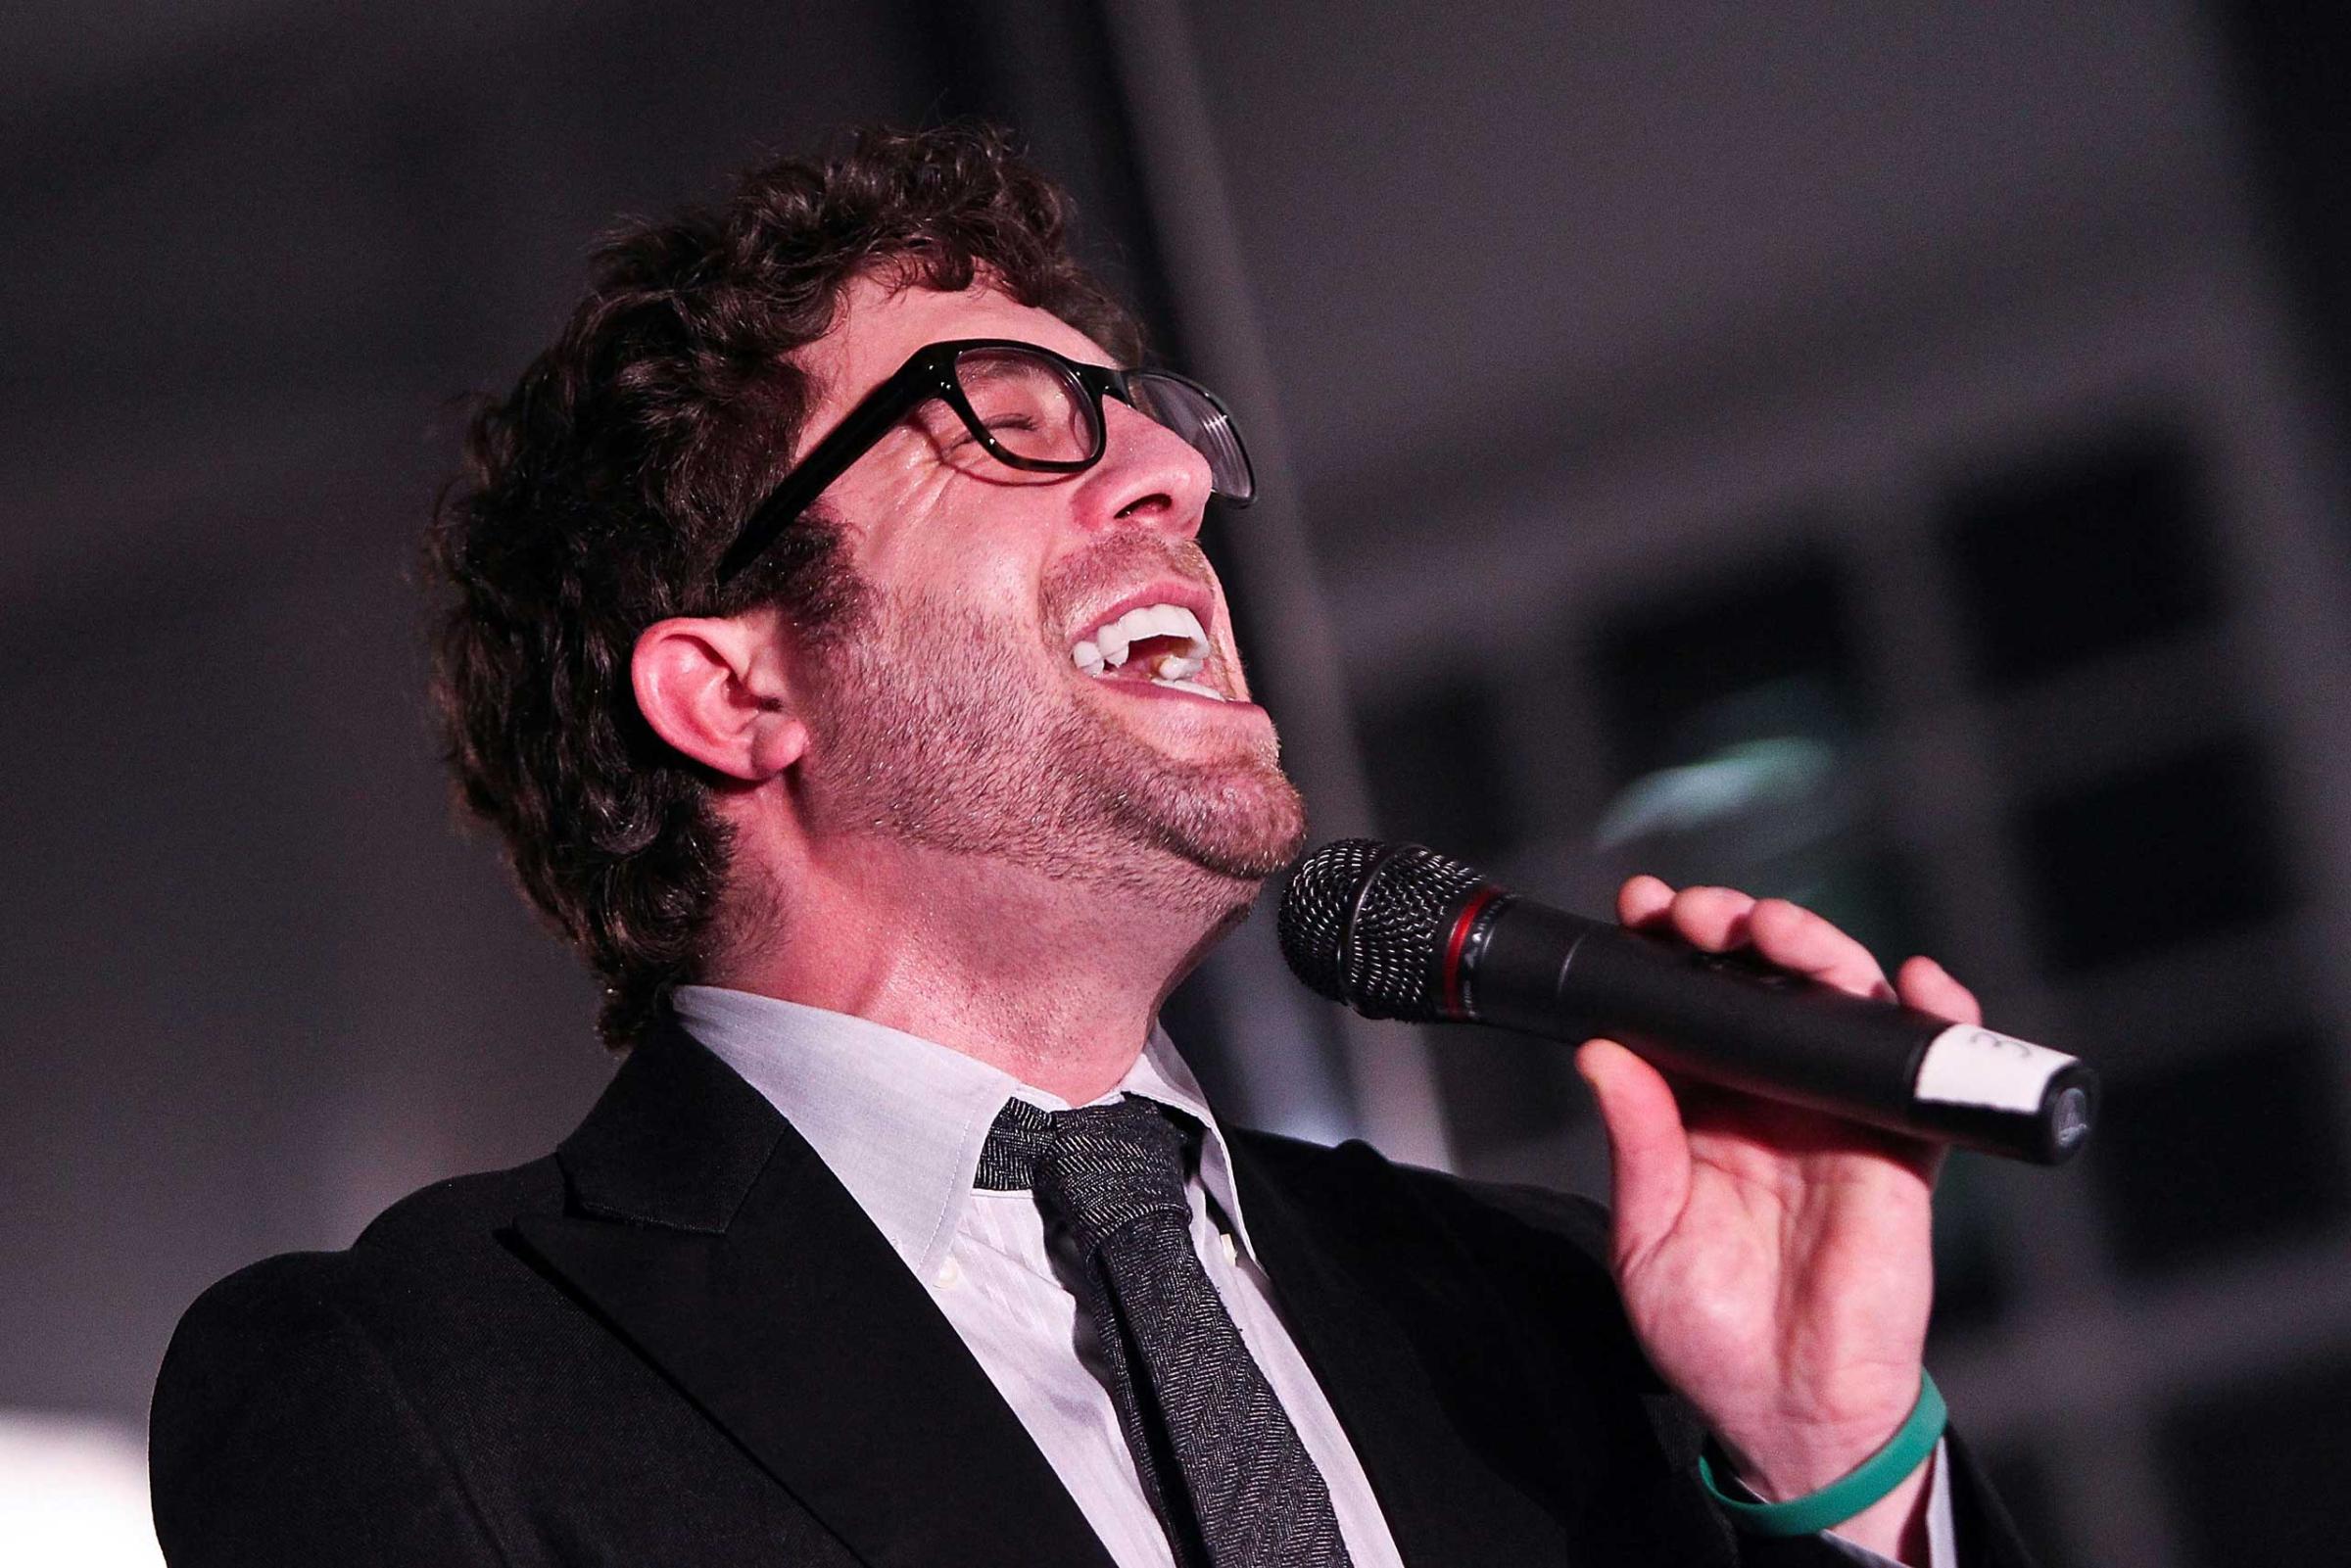 Elliott Yamin performs at the Malaria No More Reception With American Idols To Celebrate Recent Progress In The Fight Against Malaria in Washington on March 7, 2012.